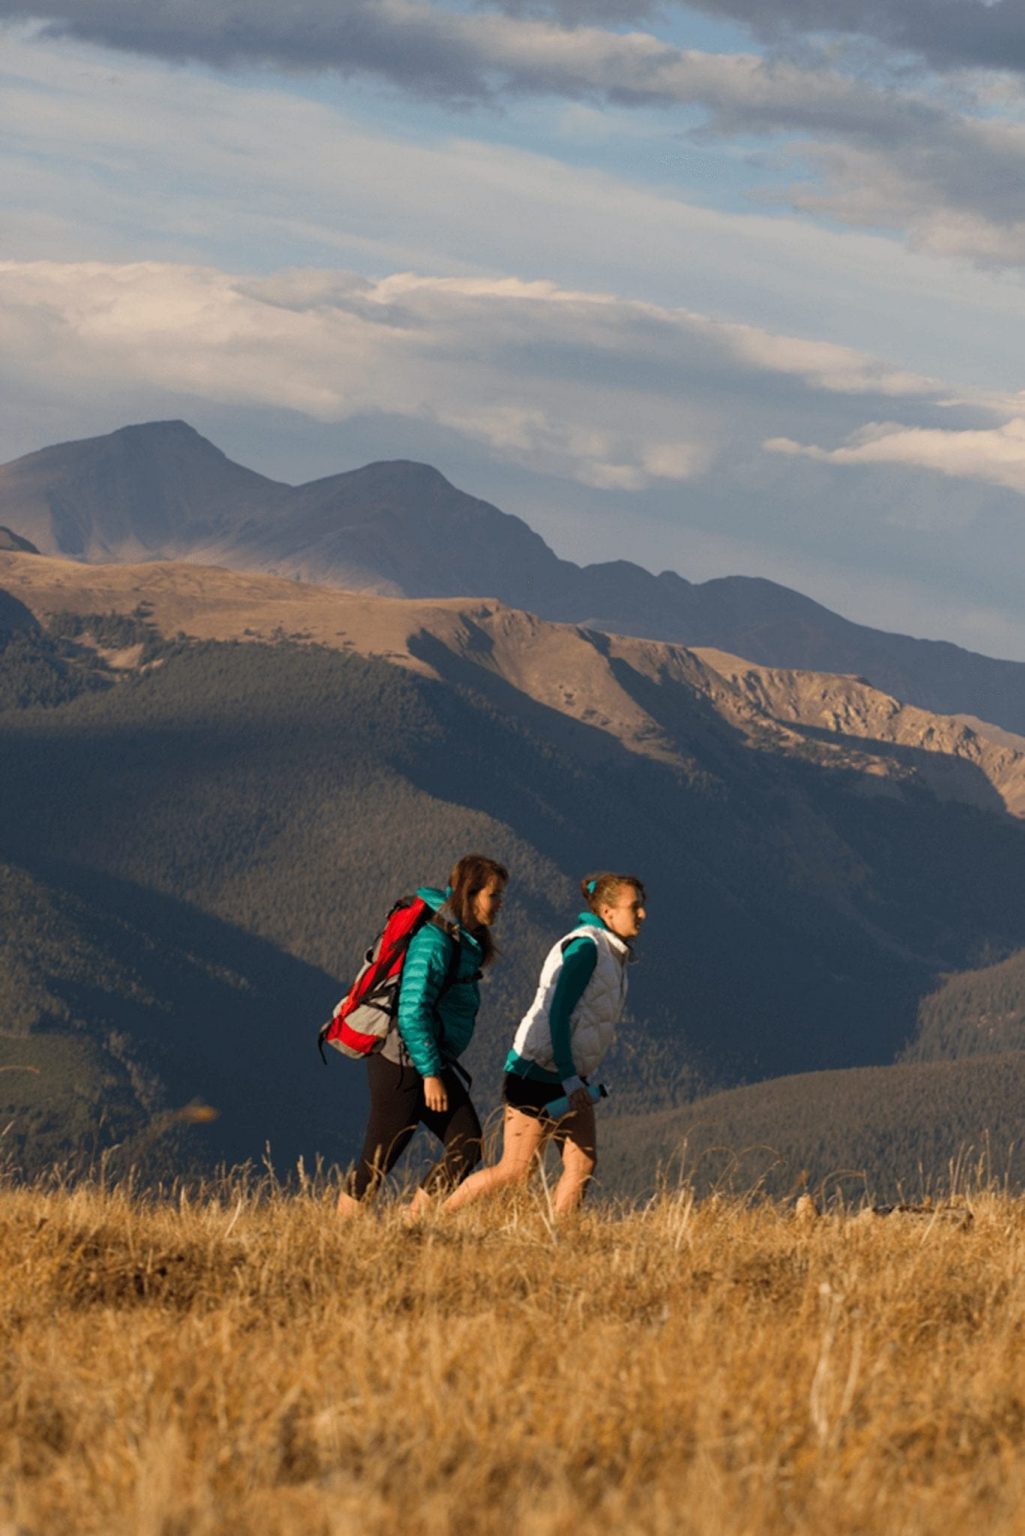 Summer in Breckenridge: girls hiking a field with a mountain view